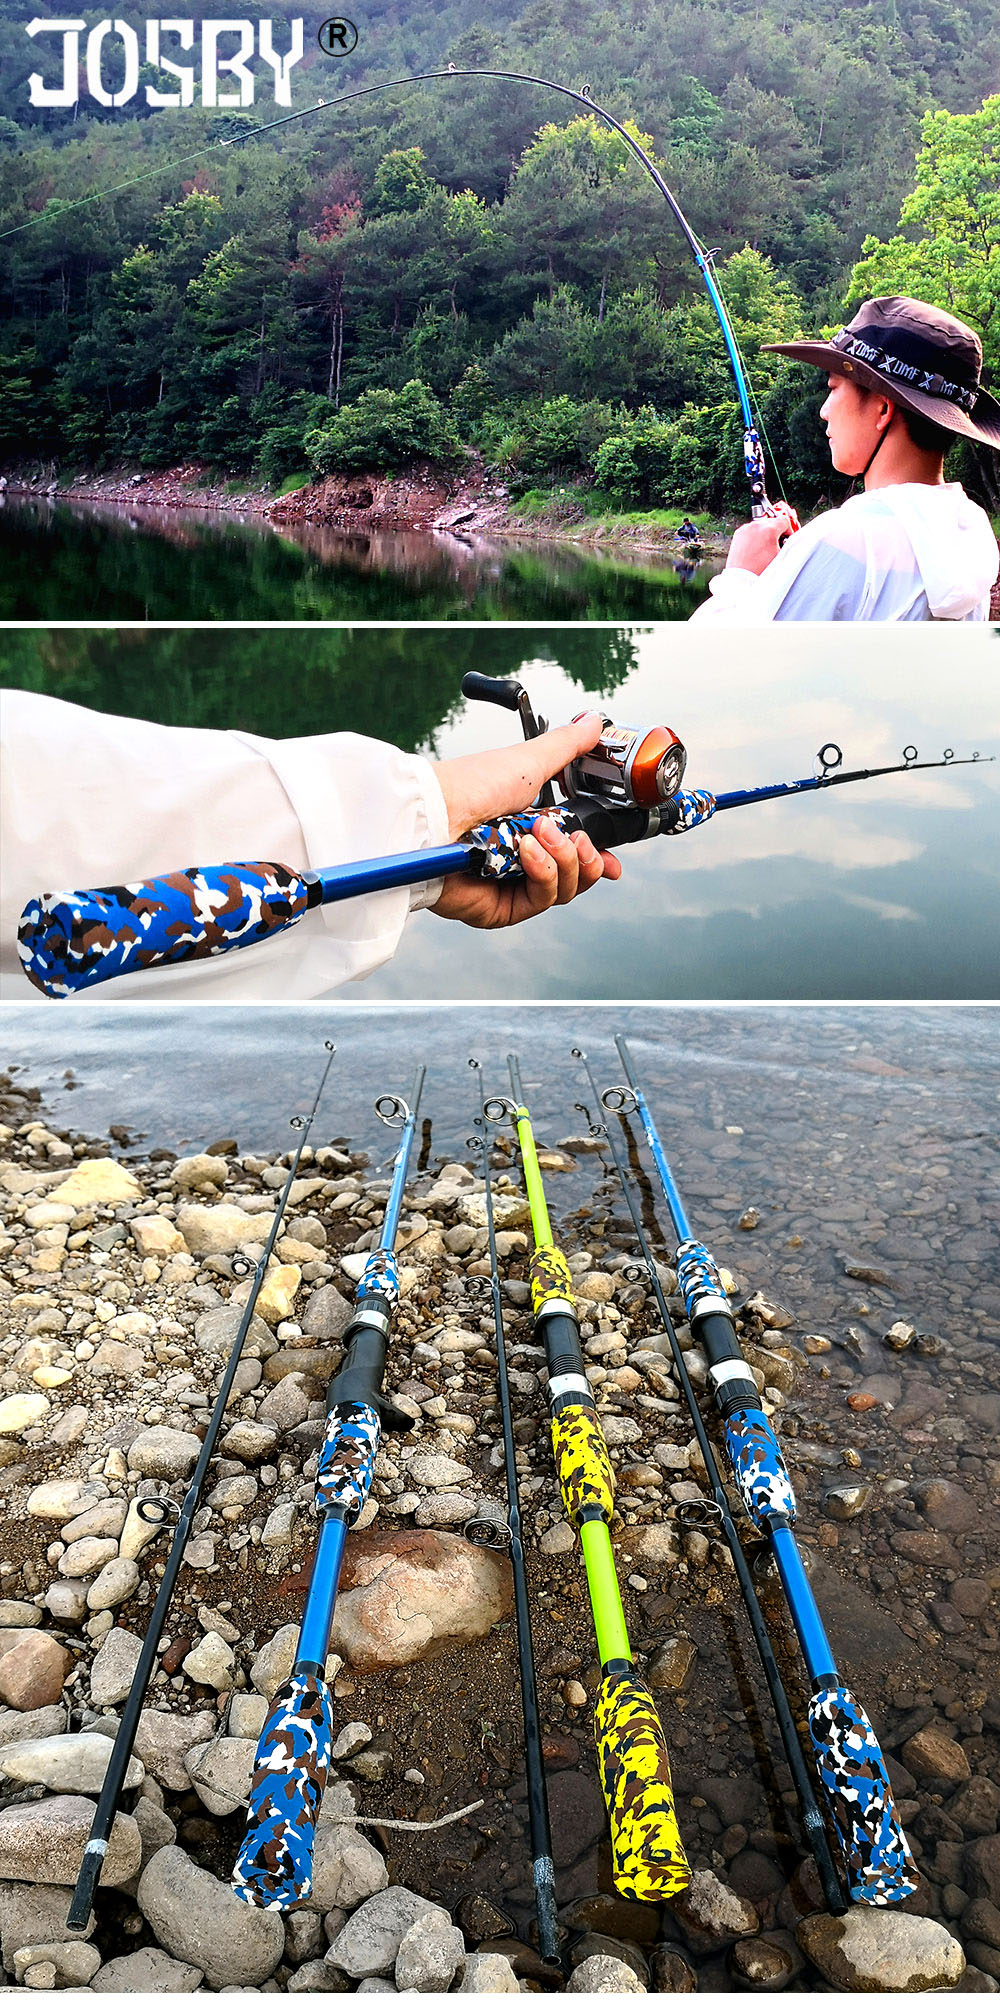 Spinning Casting Hand Lure Fishing Rod Pesca Carbon Pole Canne